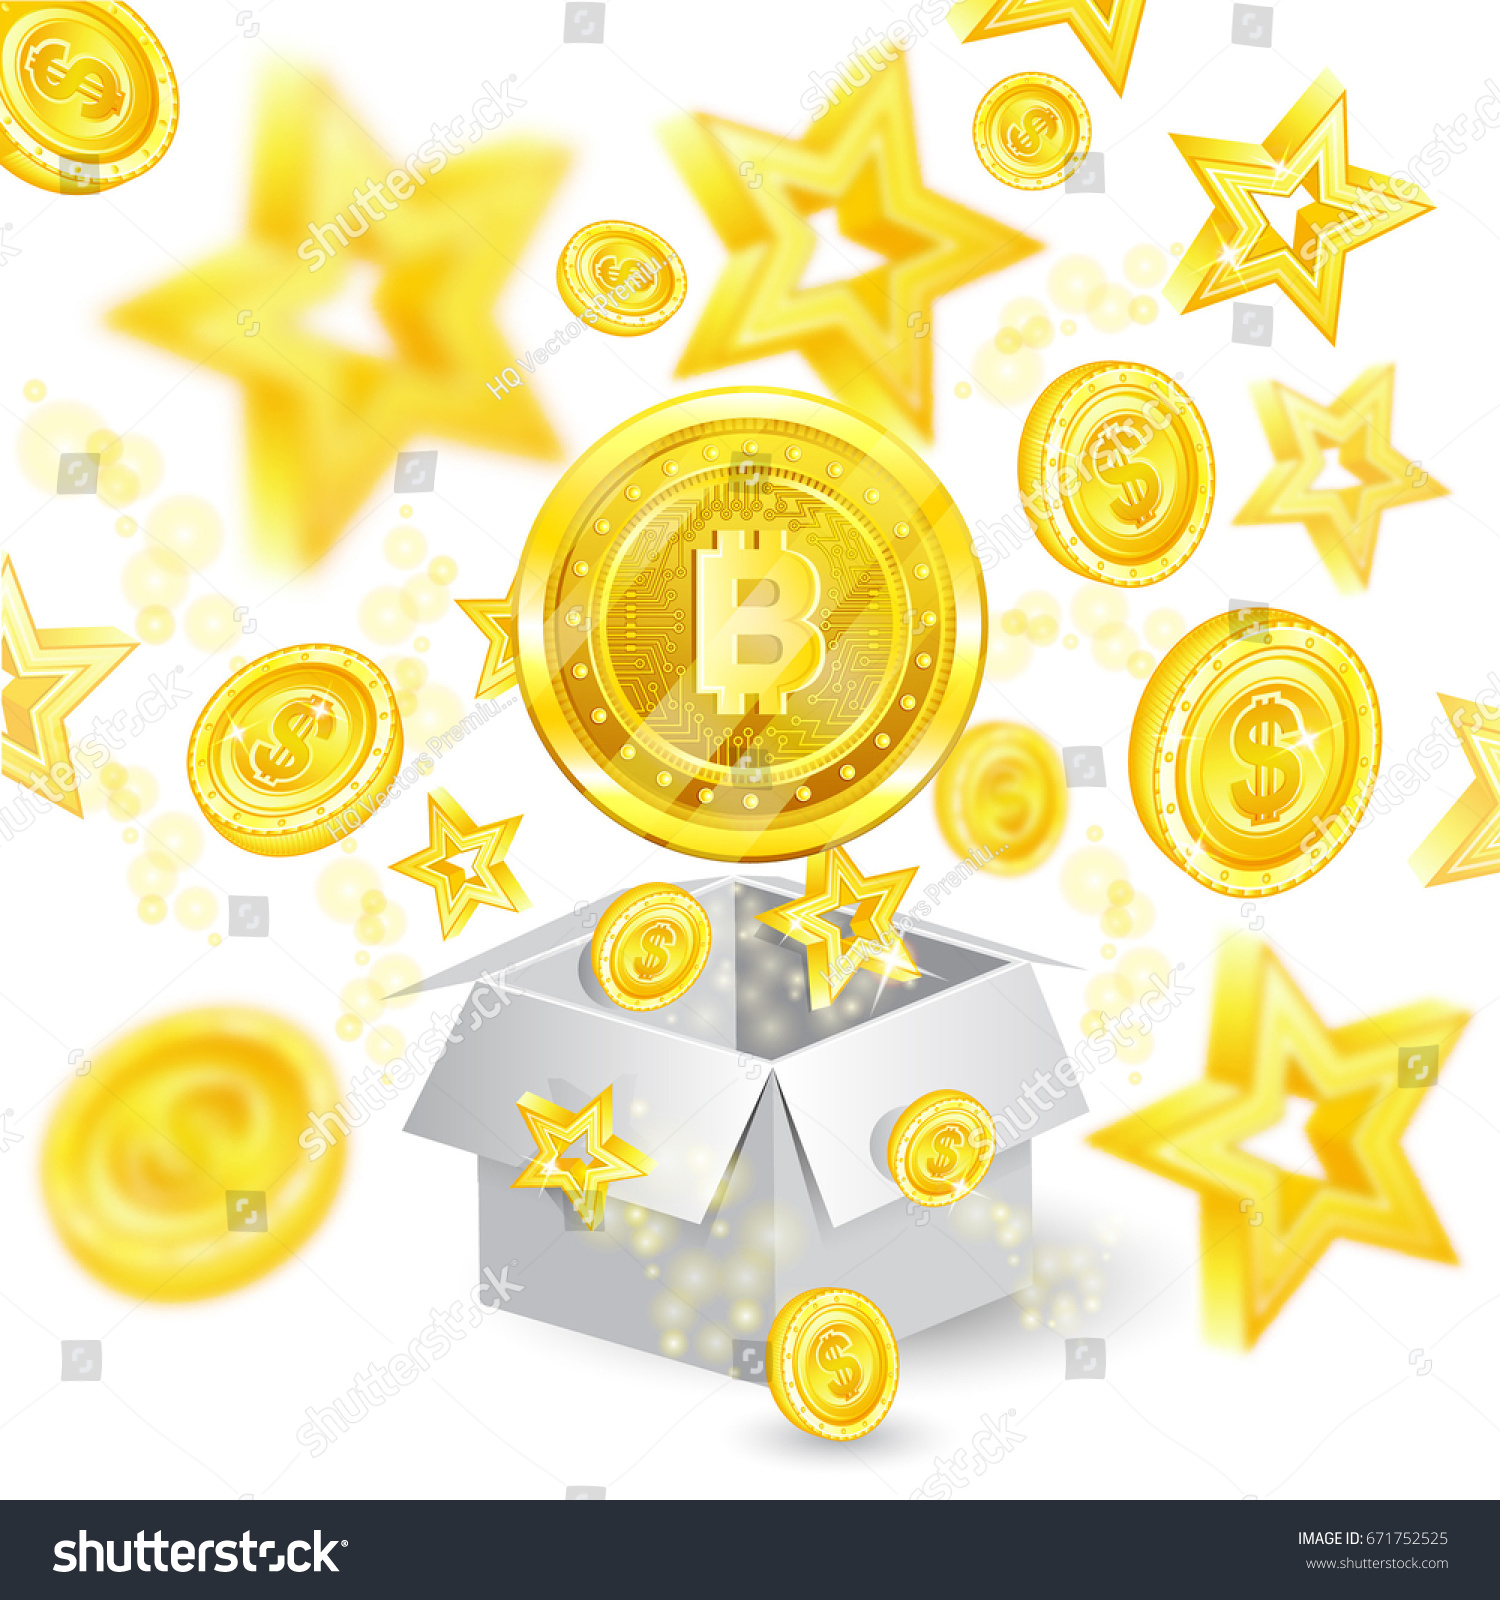 SVG of Golden bit coin in the center of flying coins and stars with depth of field effect from open gift box with  svg